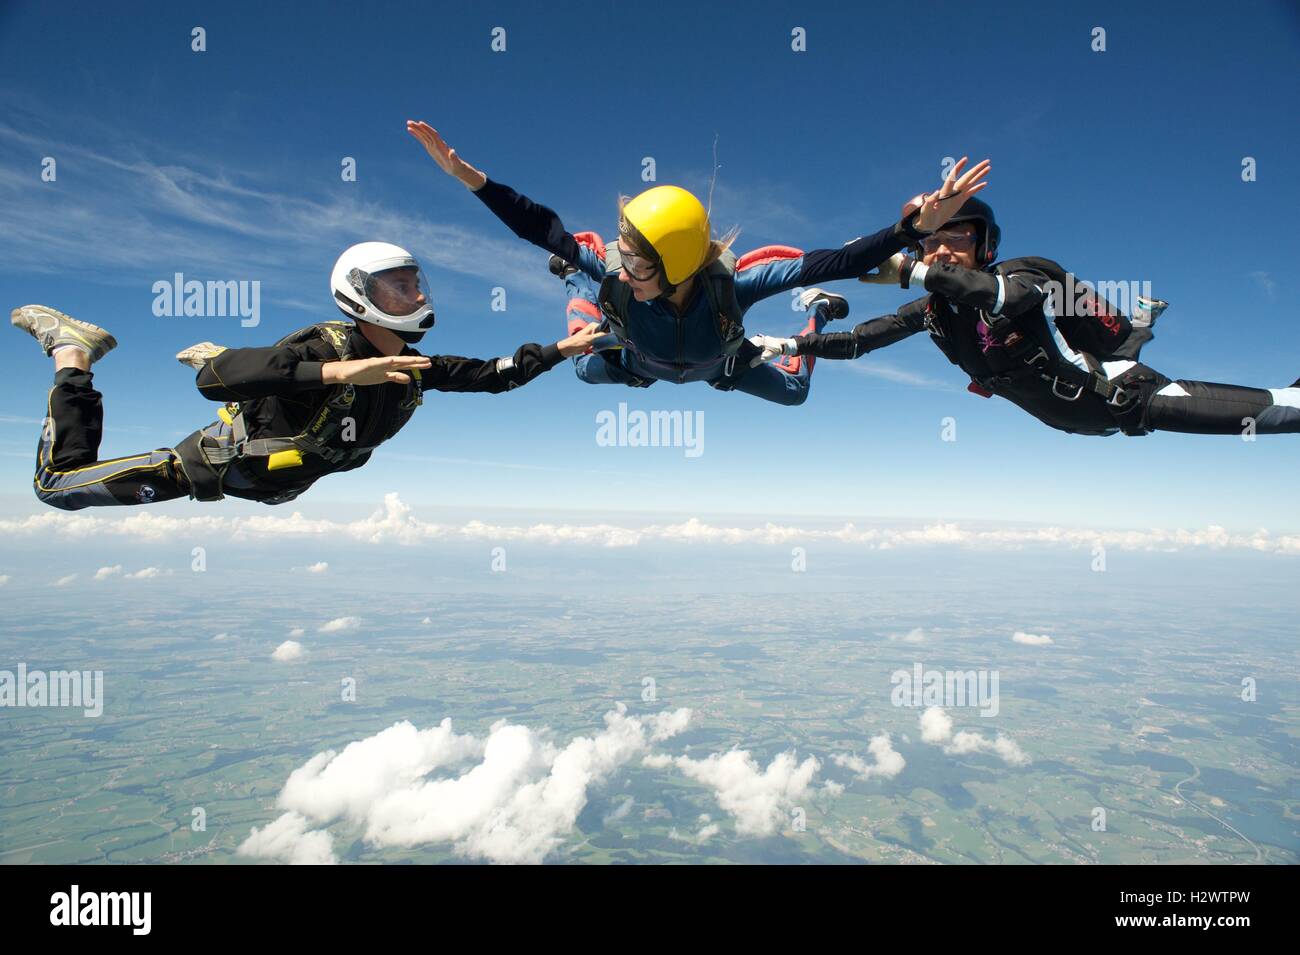 Woman on her first freefall jump with two instructors Stock Photo